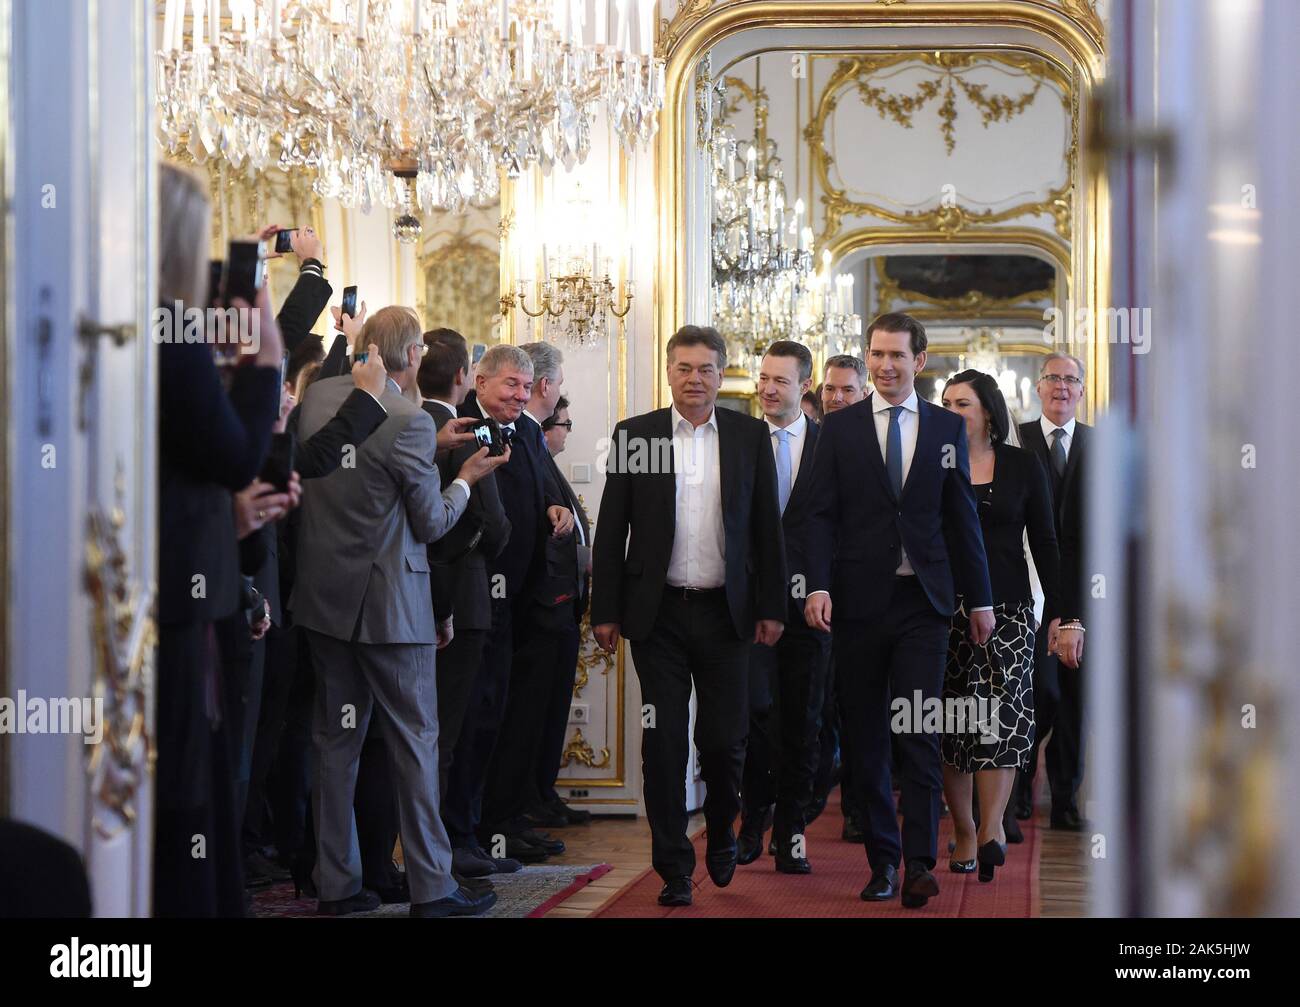 Vienna, Autstria. 7th Jan, 2020. Austria's new Chancellor Sebastian Kurz (1st R, front) and new Vice Chancellor Werner Kogler (2nd R, front) enter the swearing-in ceremony in Vienna, Autstria, Jan. 7, 2020. Austria's new coalition government was sworn in by President Alexander Van der Bellen at the presidential residence of Hofburg Palace on Tuesday. Credit: Guo Chen/Xinhua/Alamy Live News Stock Photo